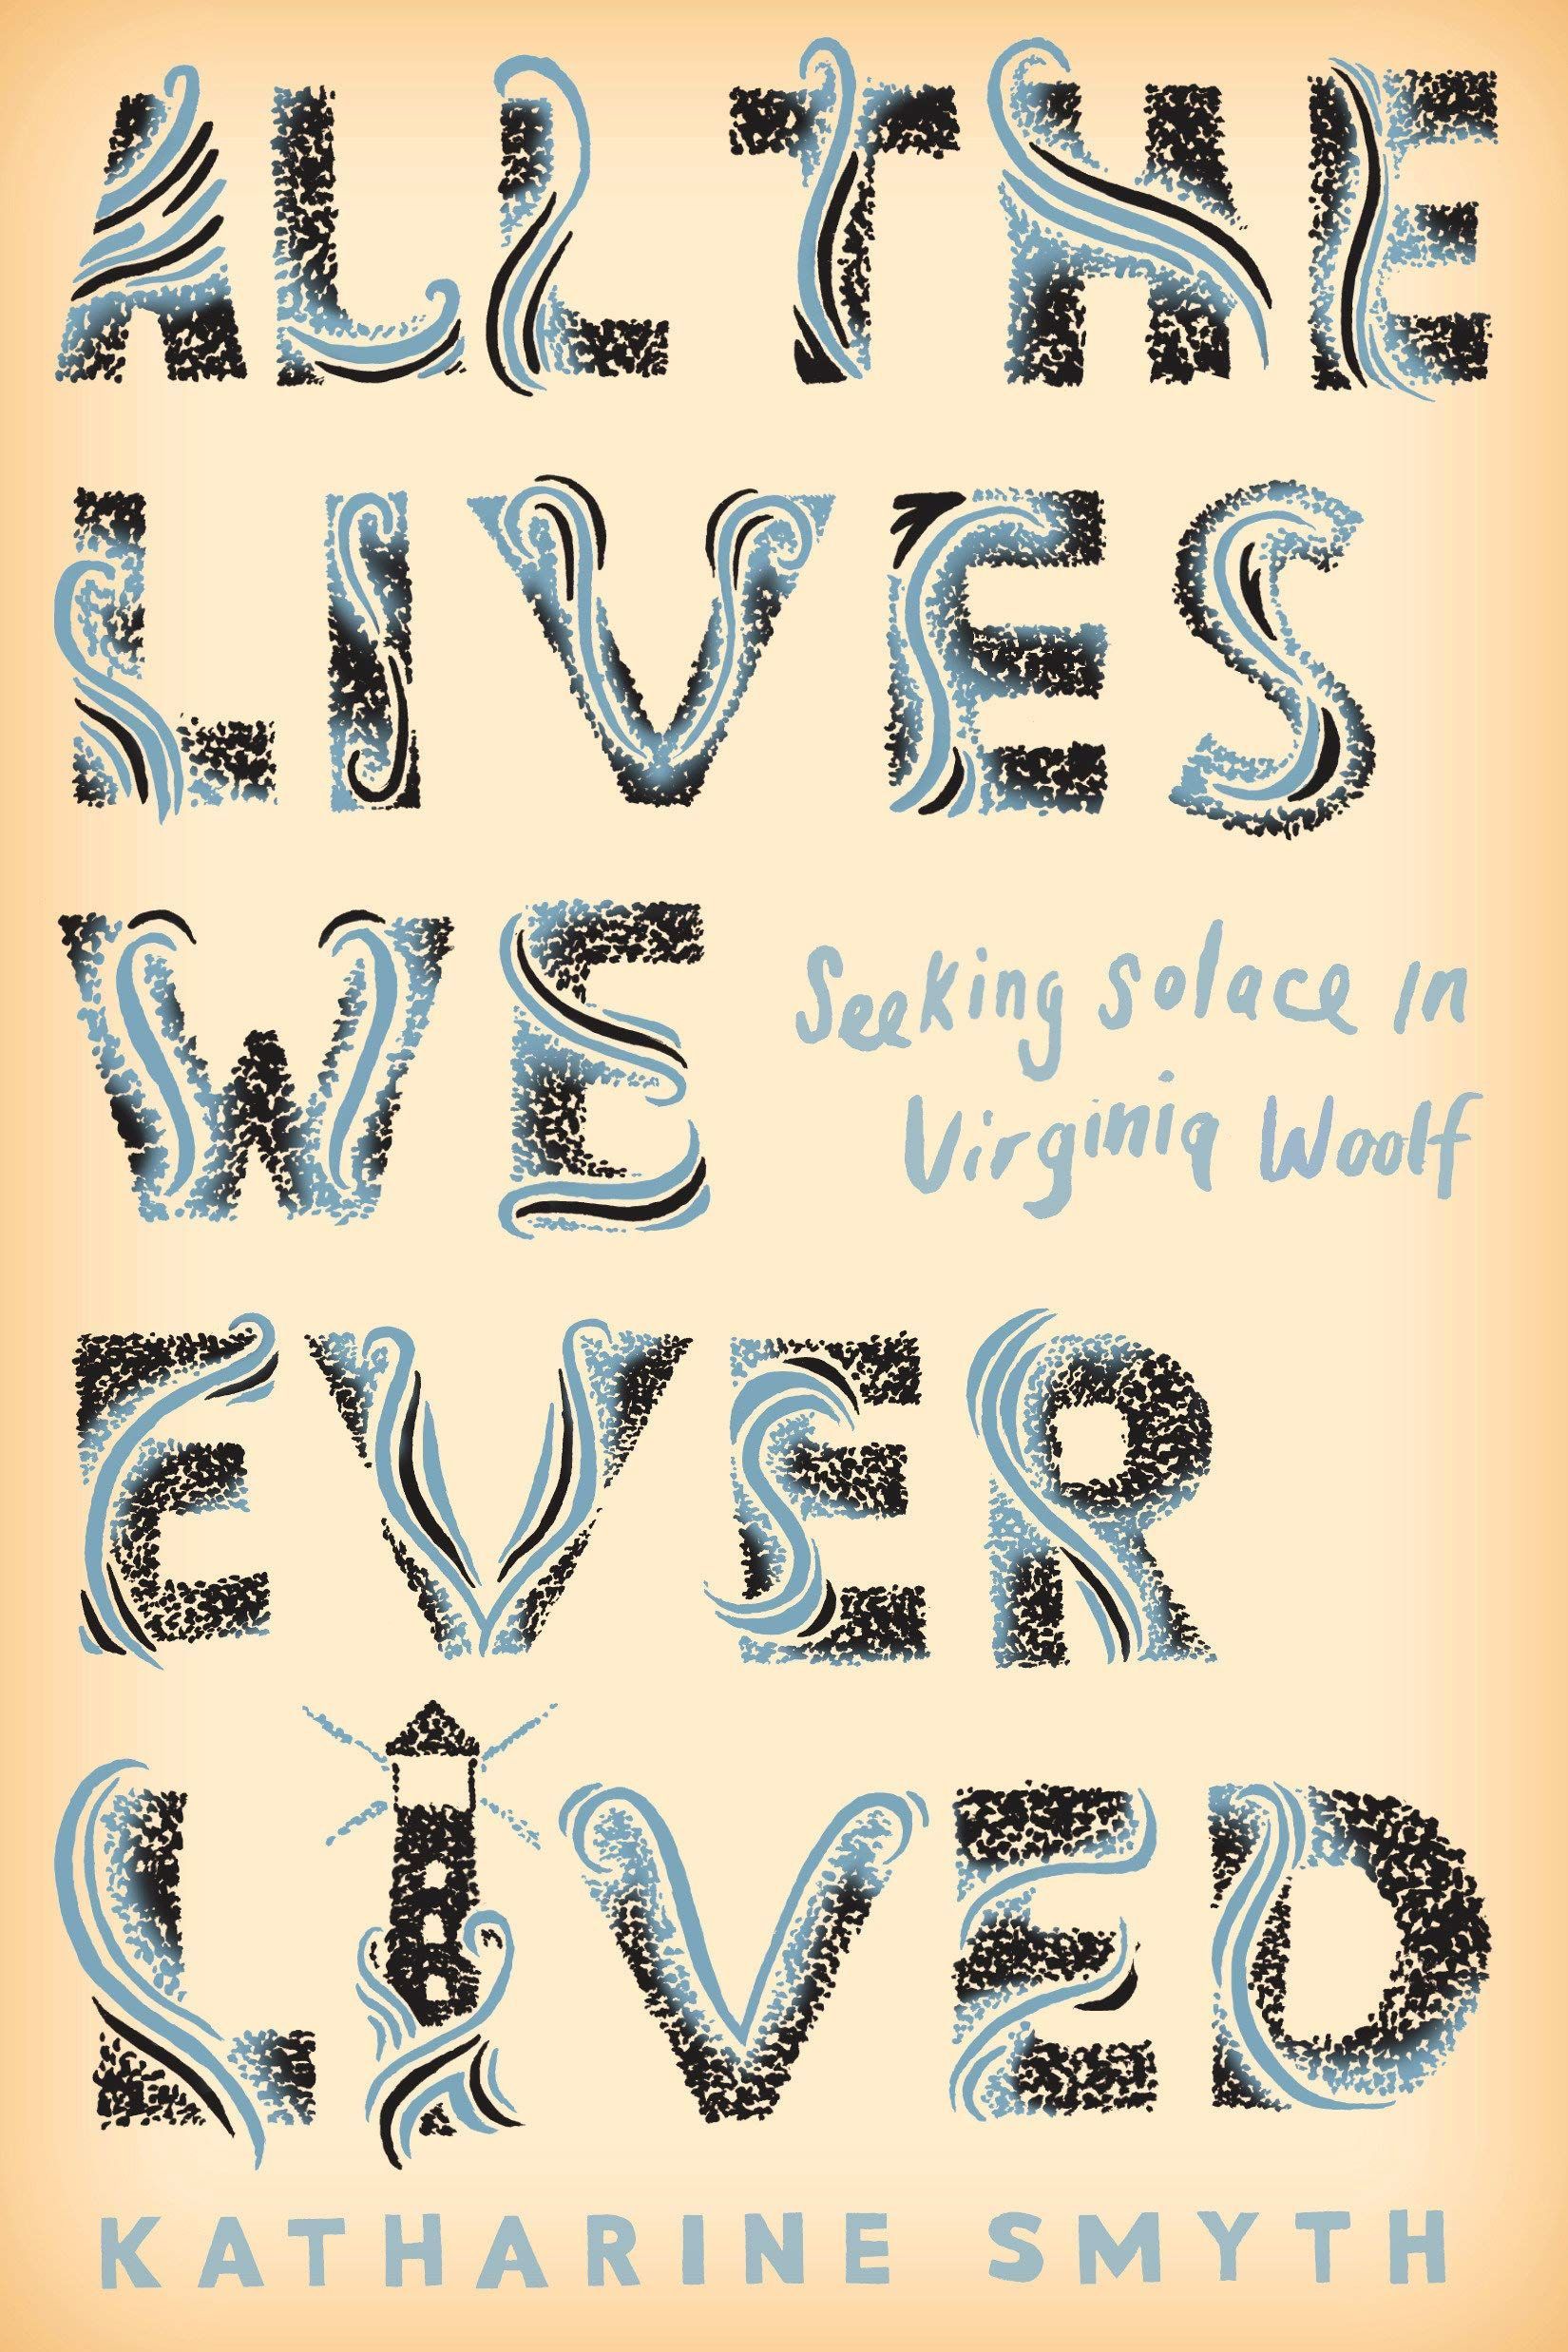 The Awful Shapelessness of Loss: On Katharine Smyth’s “All the Lives We Ever Lived: Seeking Solace in Virginia Woolf”